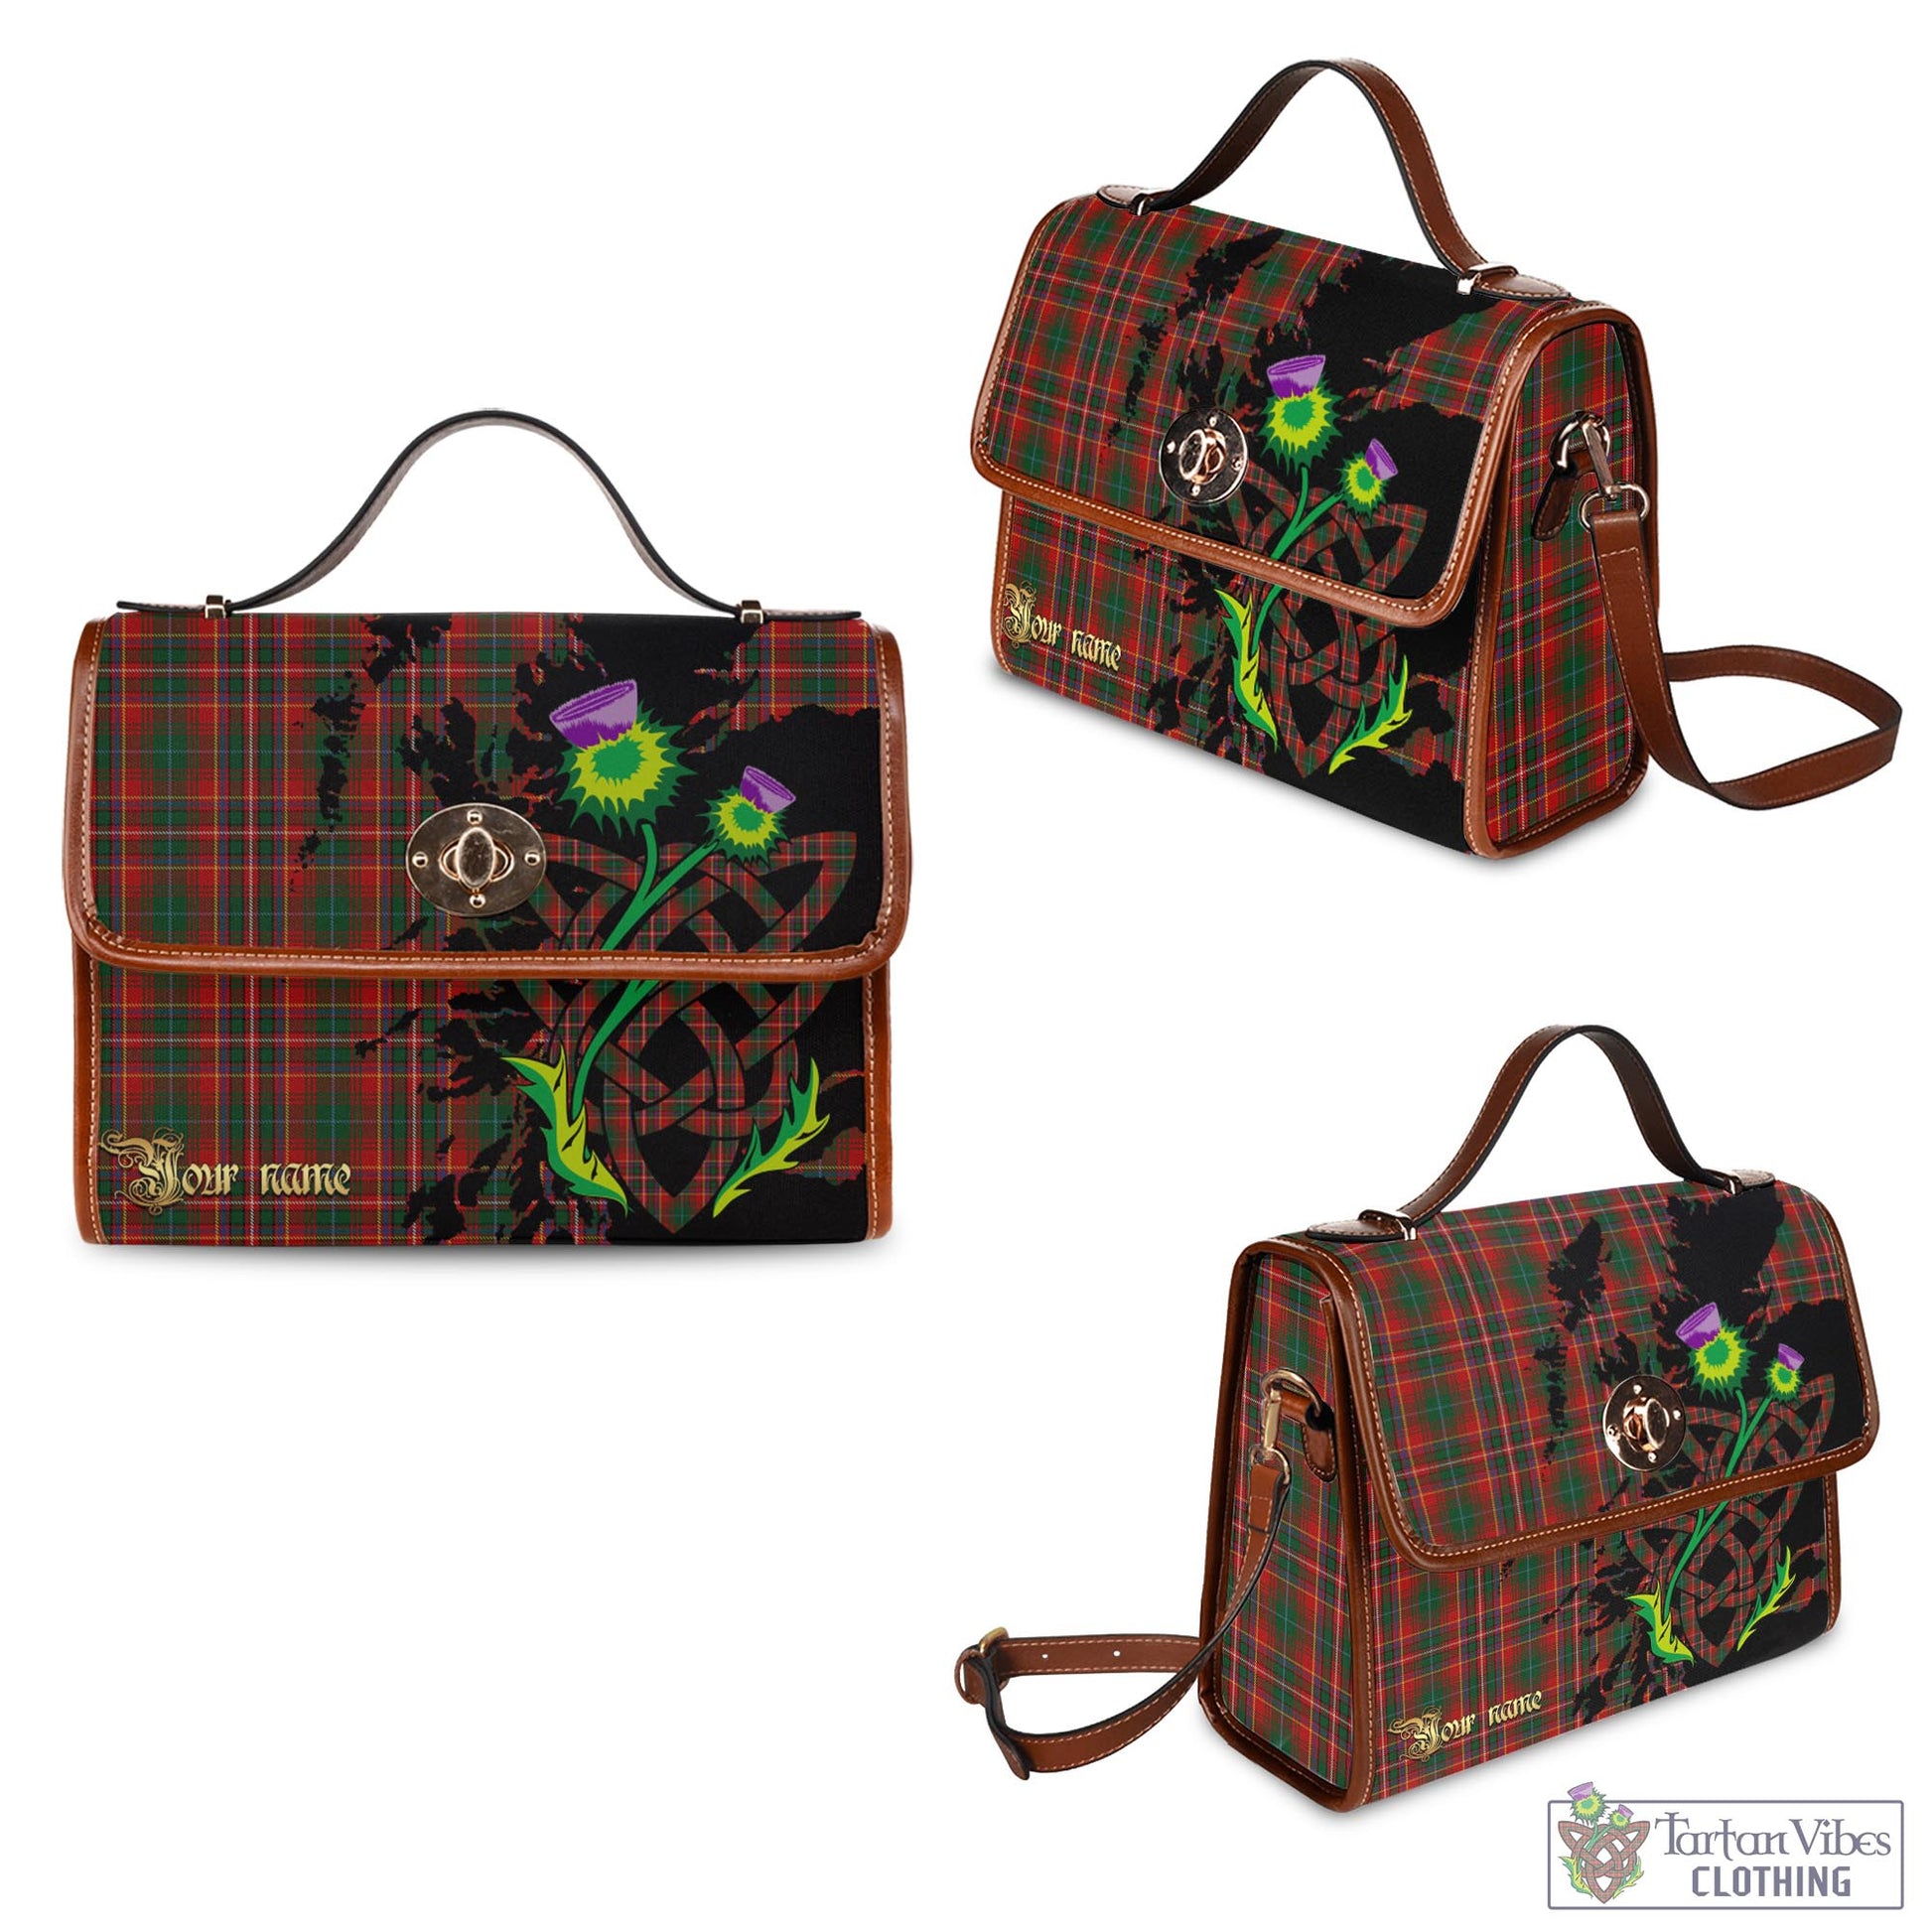 Tartan Vibes Clothing MacInnes Hastie Tartan Waterproof Canvas Bag with Scotland Map and Thistle Celtic Accents